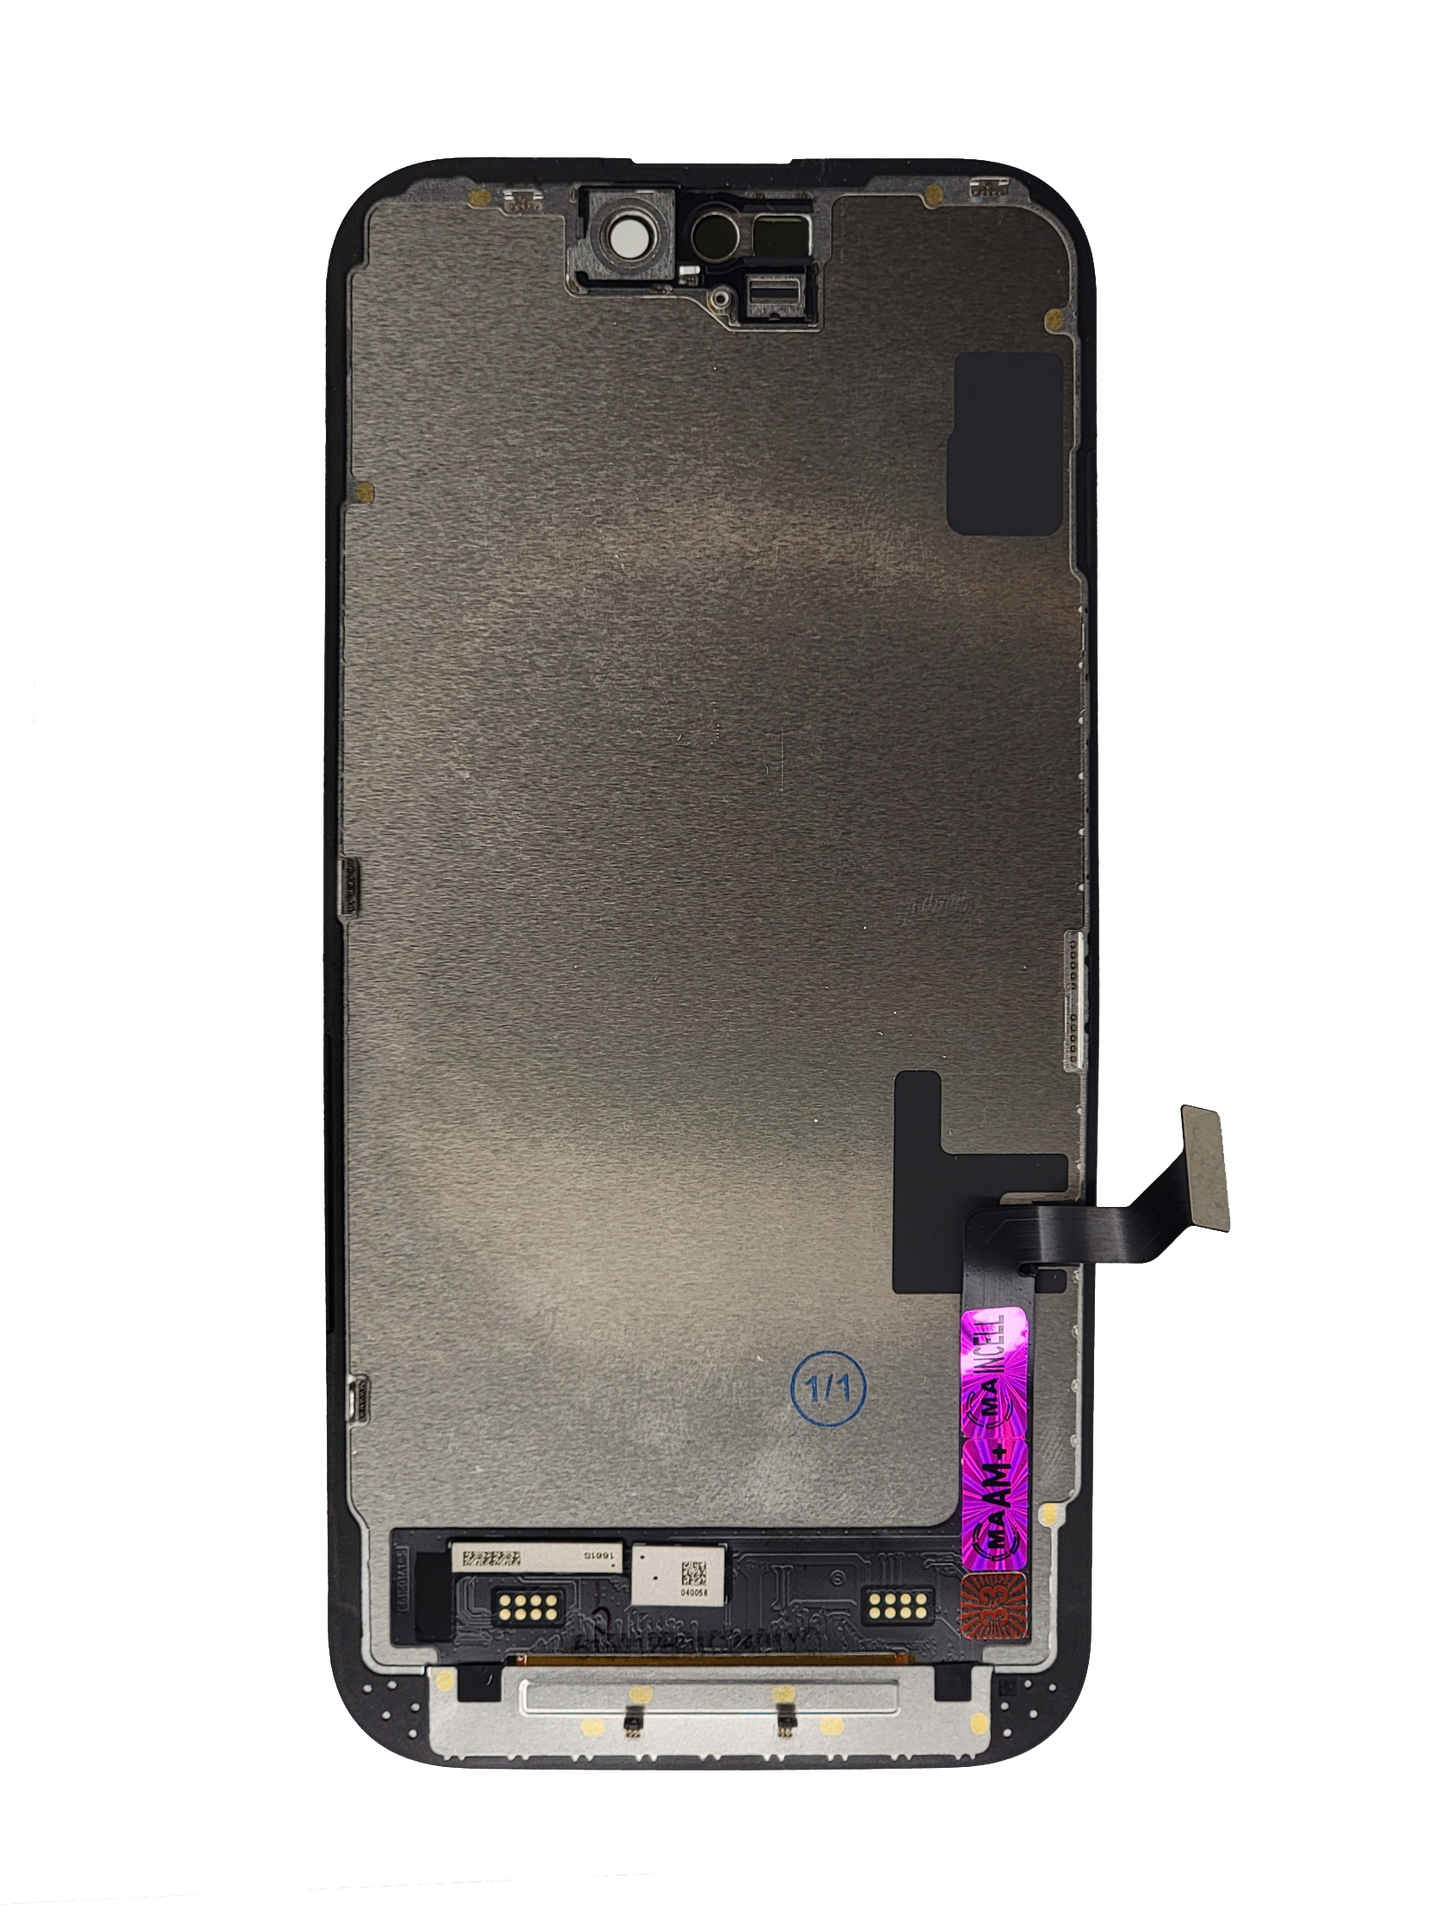 iPhone 15 Screen Assembly (Incell) (Aftermarket Plus)